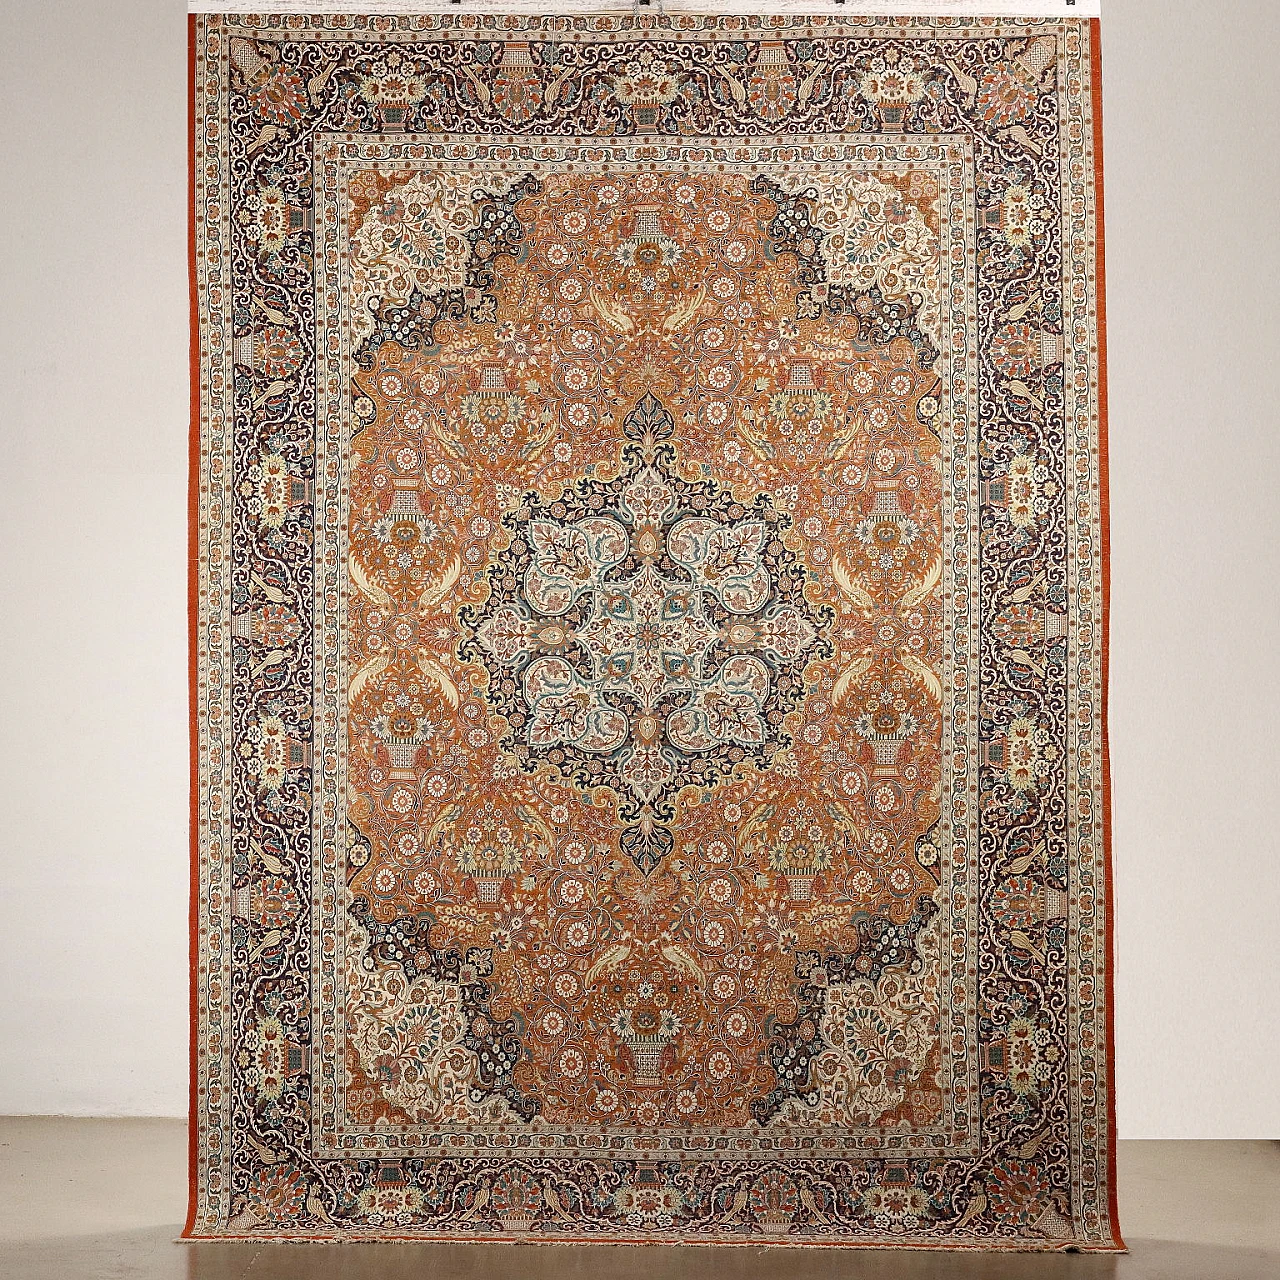 Lahore cotton, wool and silk fine-knotted rug 8